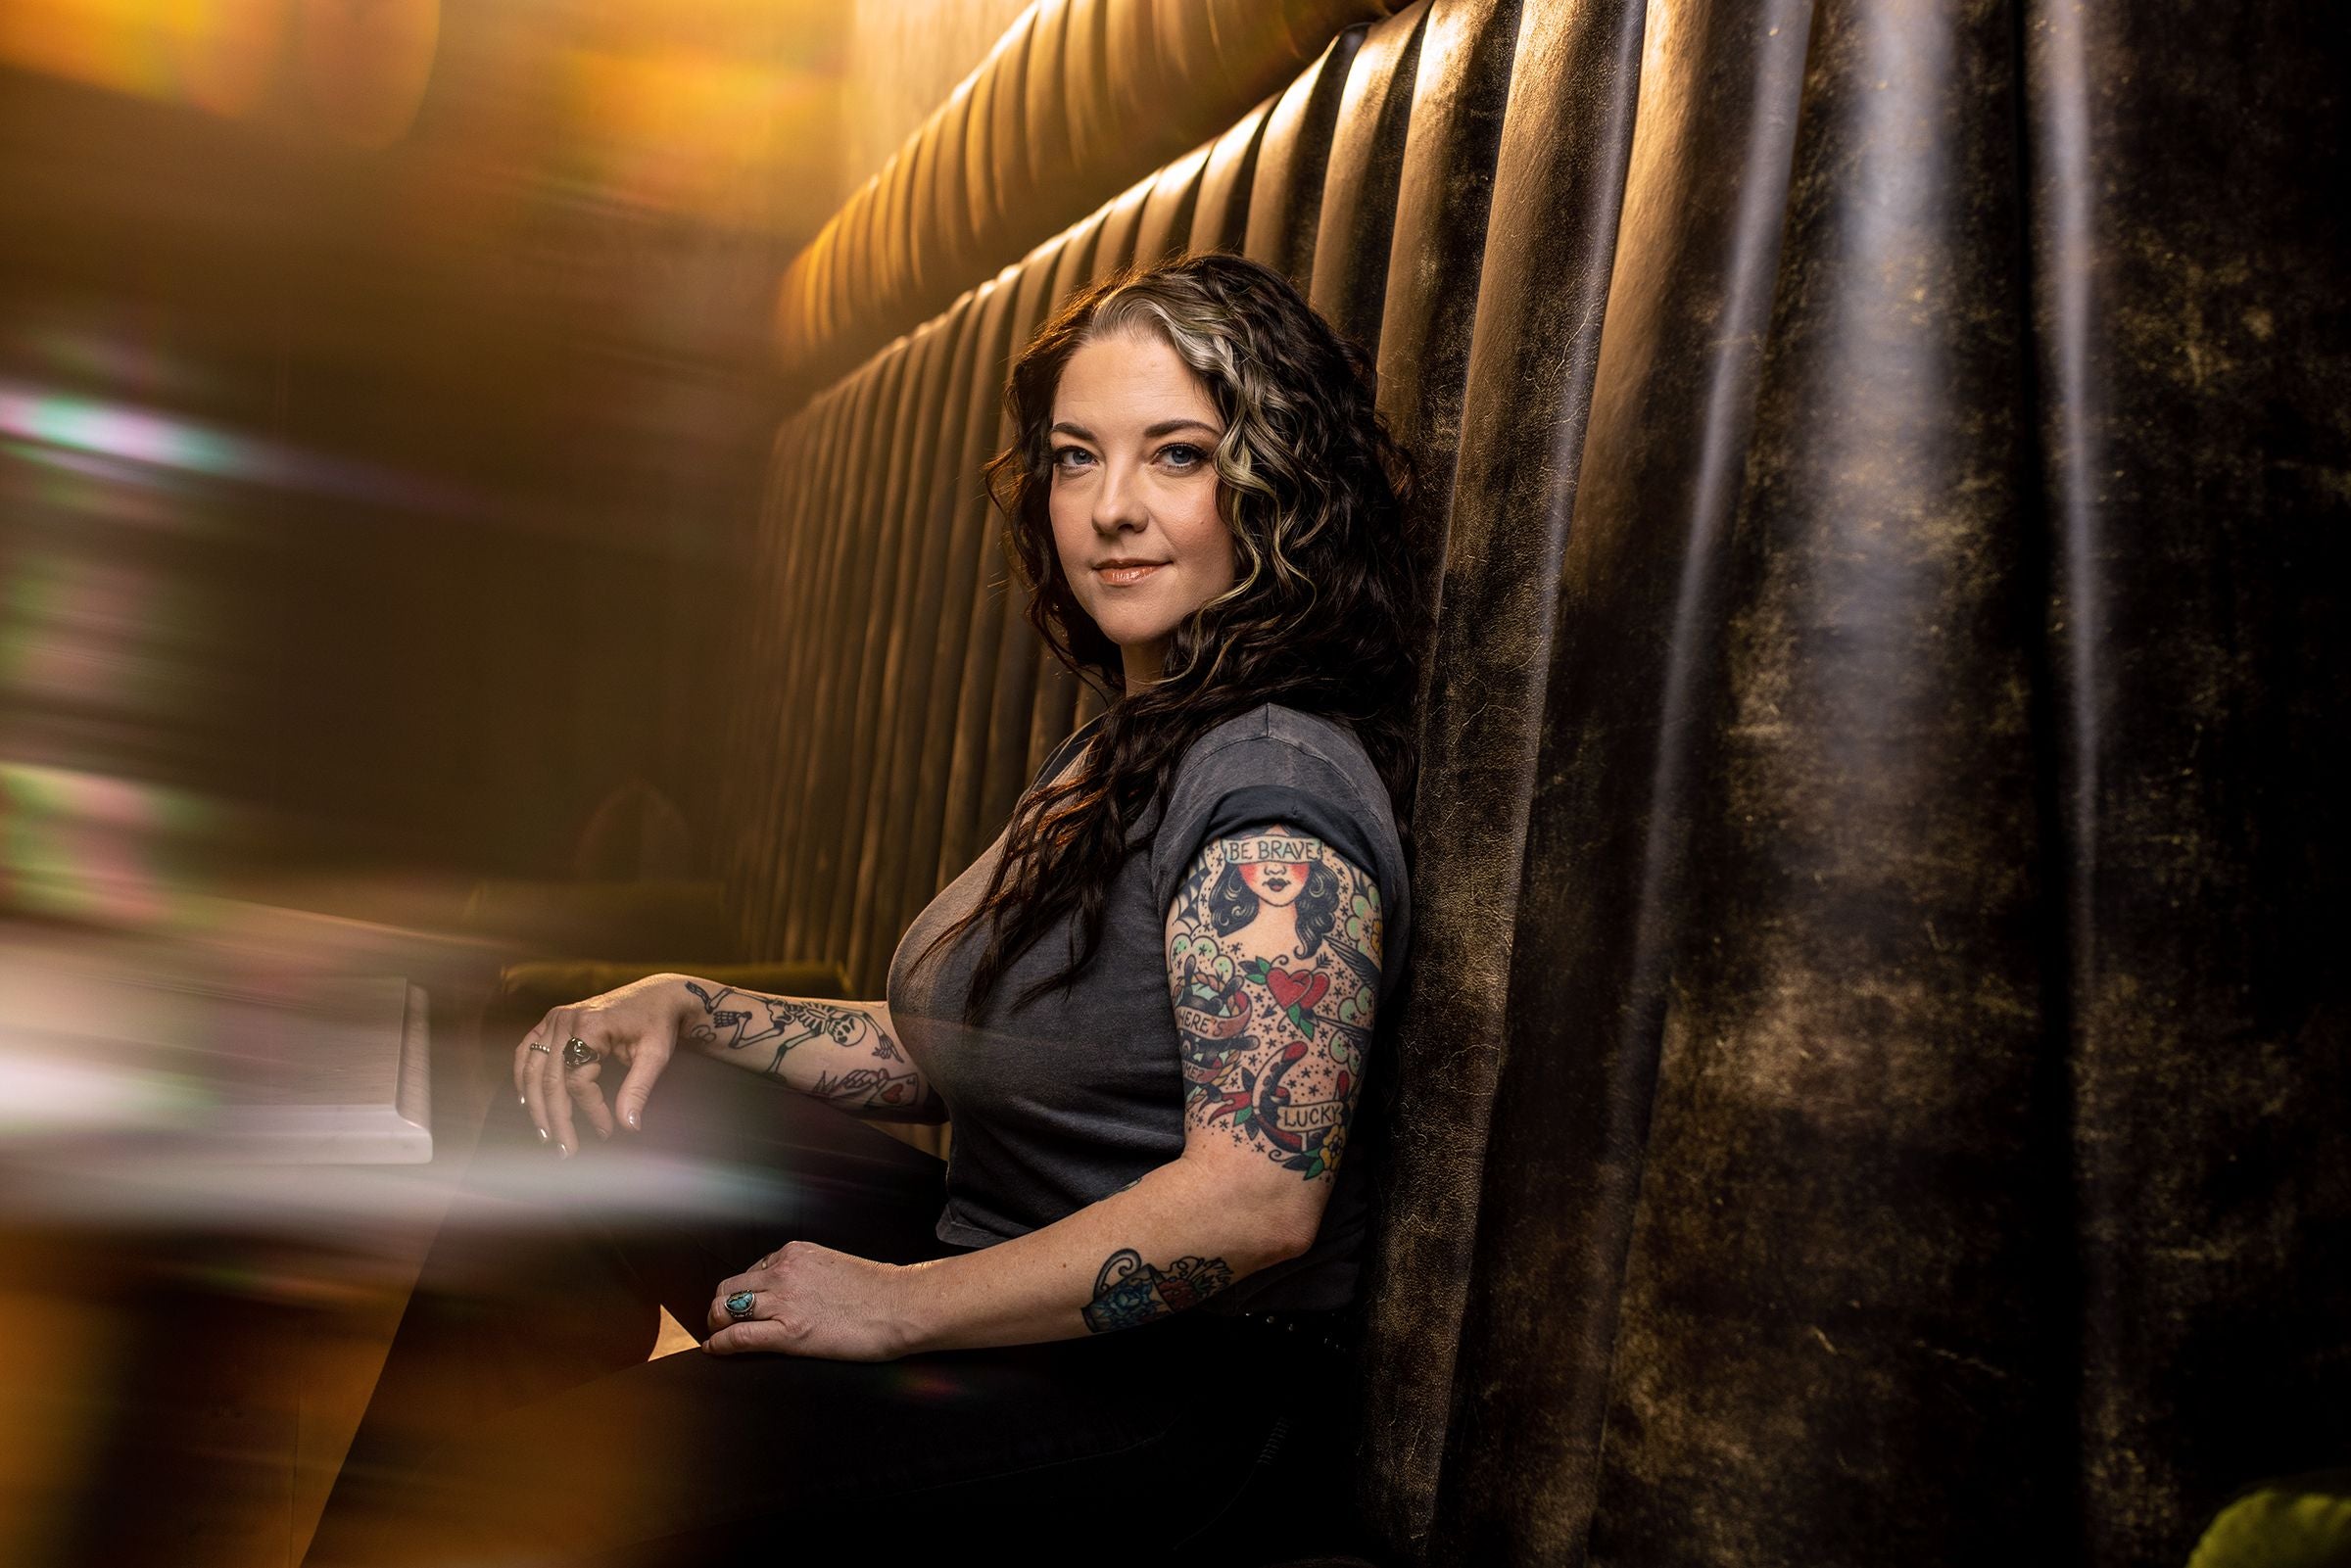 Ashley McBryde: The Devil I Know Tour free pre-sale code for early tickets in San Francisco